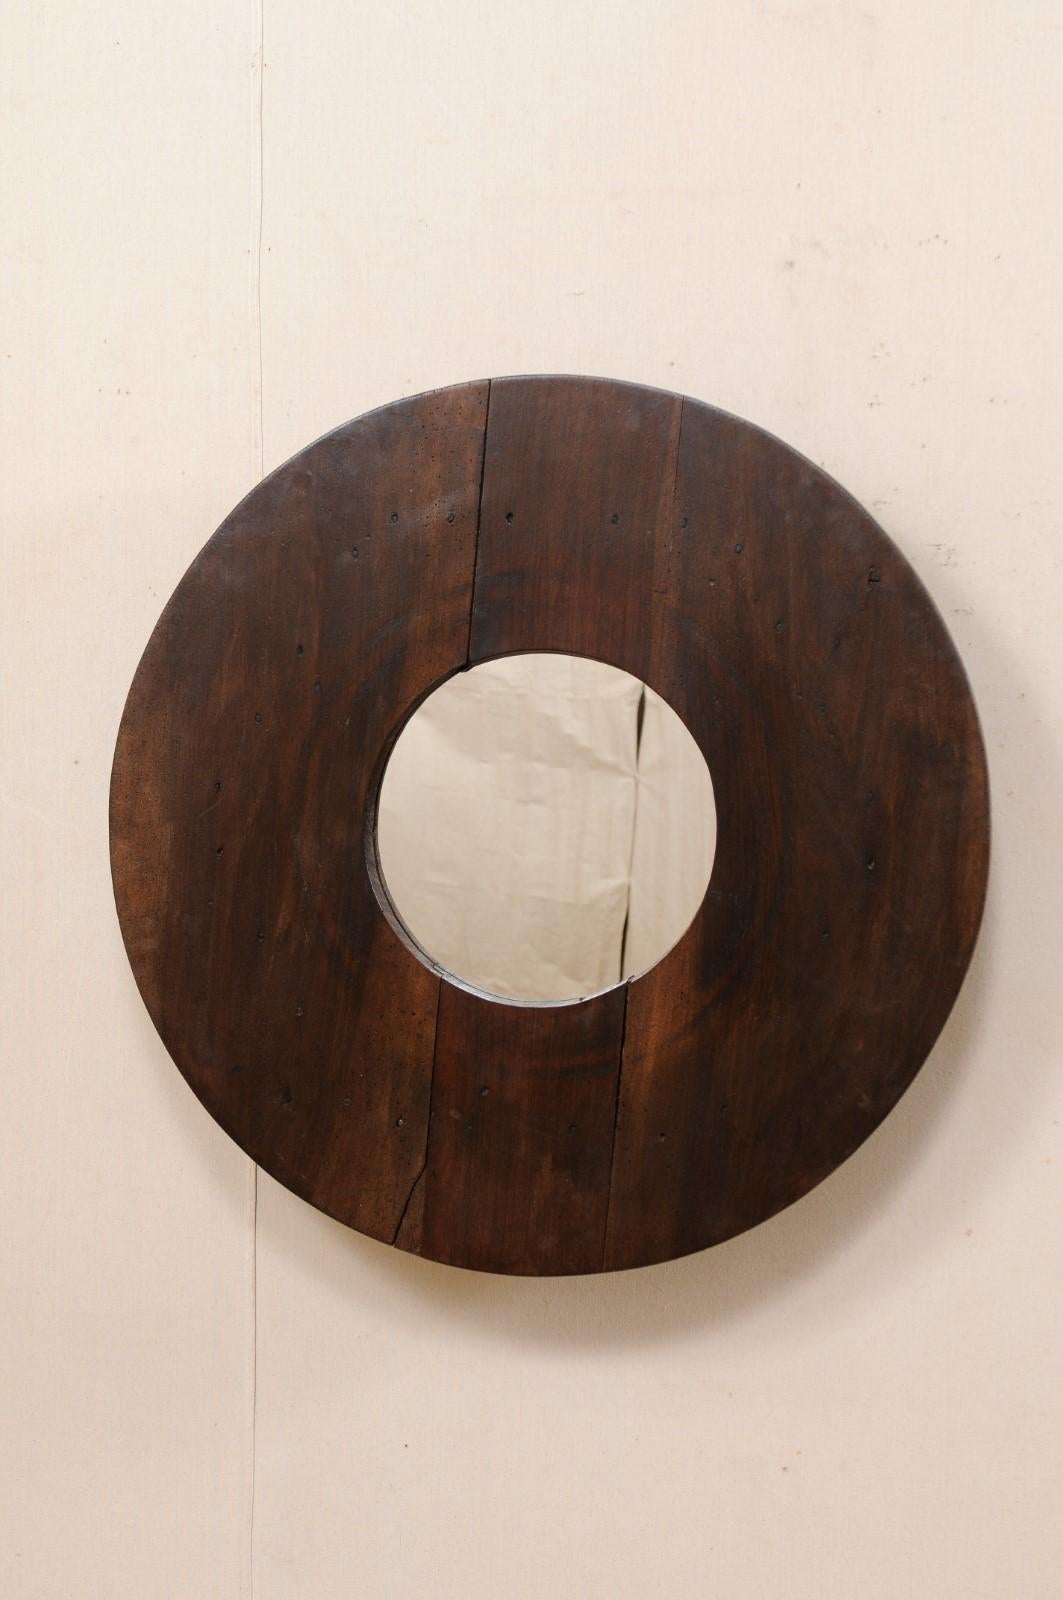 This custom mirror has been creatively up-cycled with an old N. African wooden cooking utensil as the surround, with new mirrored glass in it's center. This mirror features a circular-shaped mirror, within a round-shaped wooden frame from N. Africa,